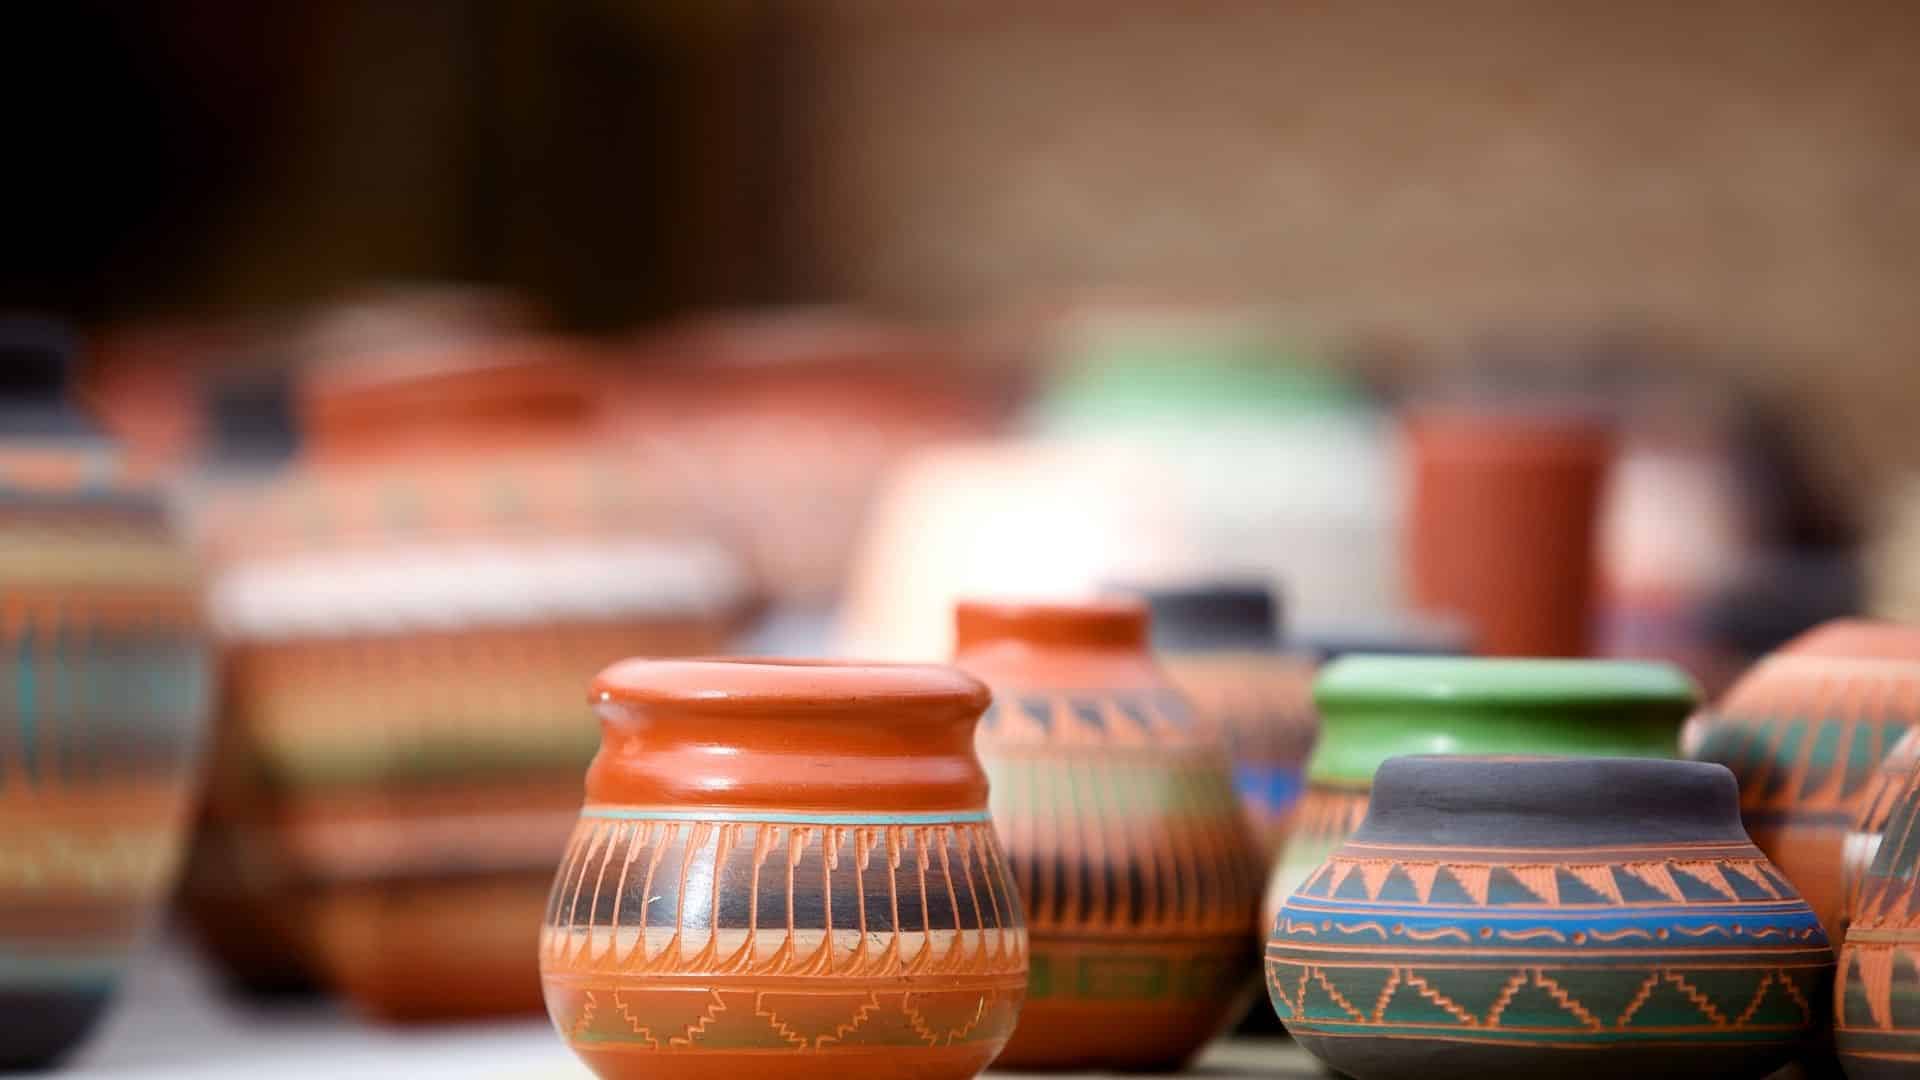 Rows of native american pottery in shades of terra cotta, green, gold and blue